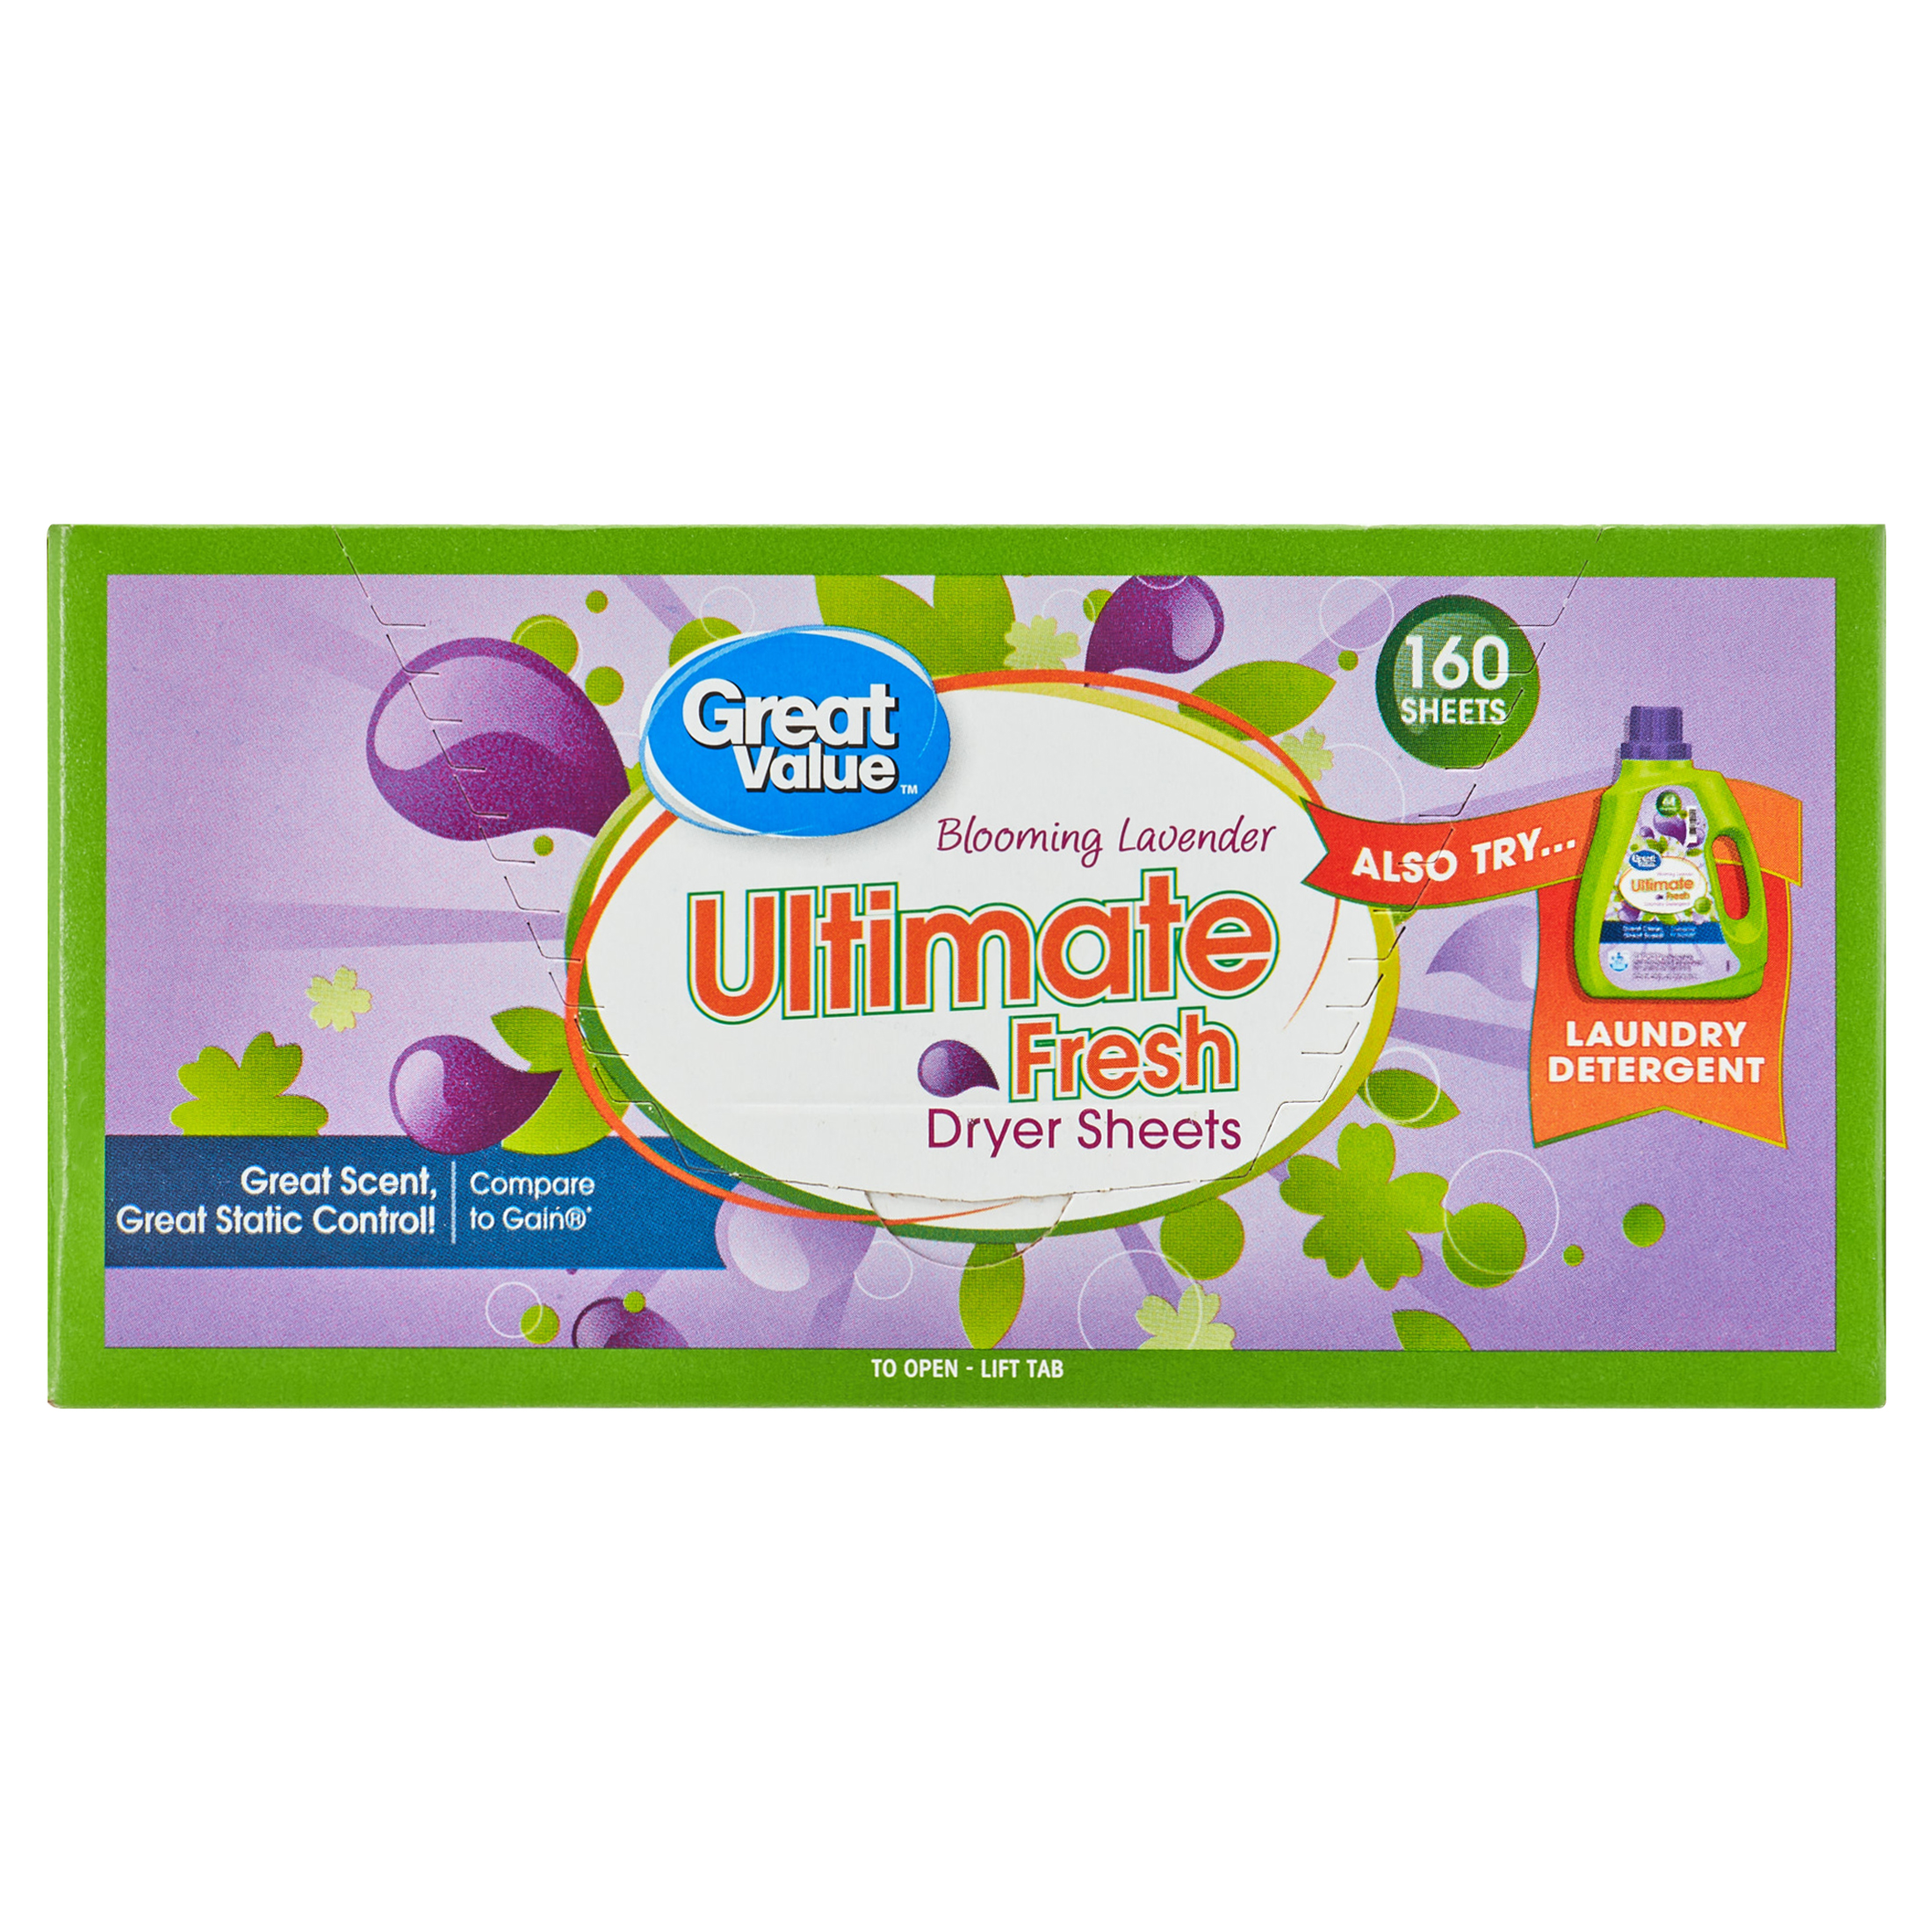 Great Value Ultimate Fresh Fabric Softener Dryer Sheets, Blooming Lavender, 160 Count - image 8 of 11